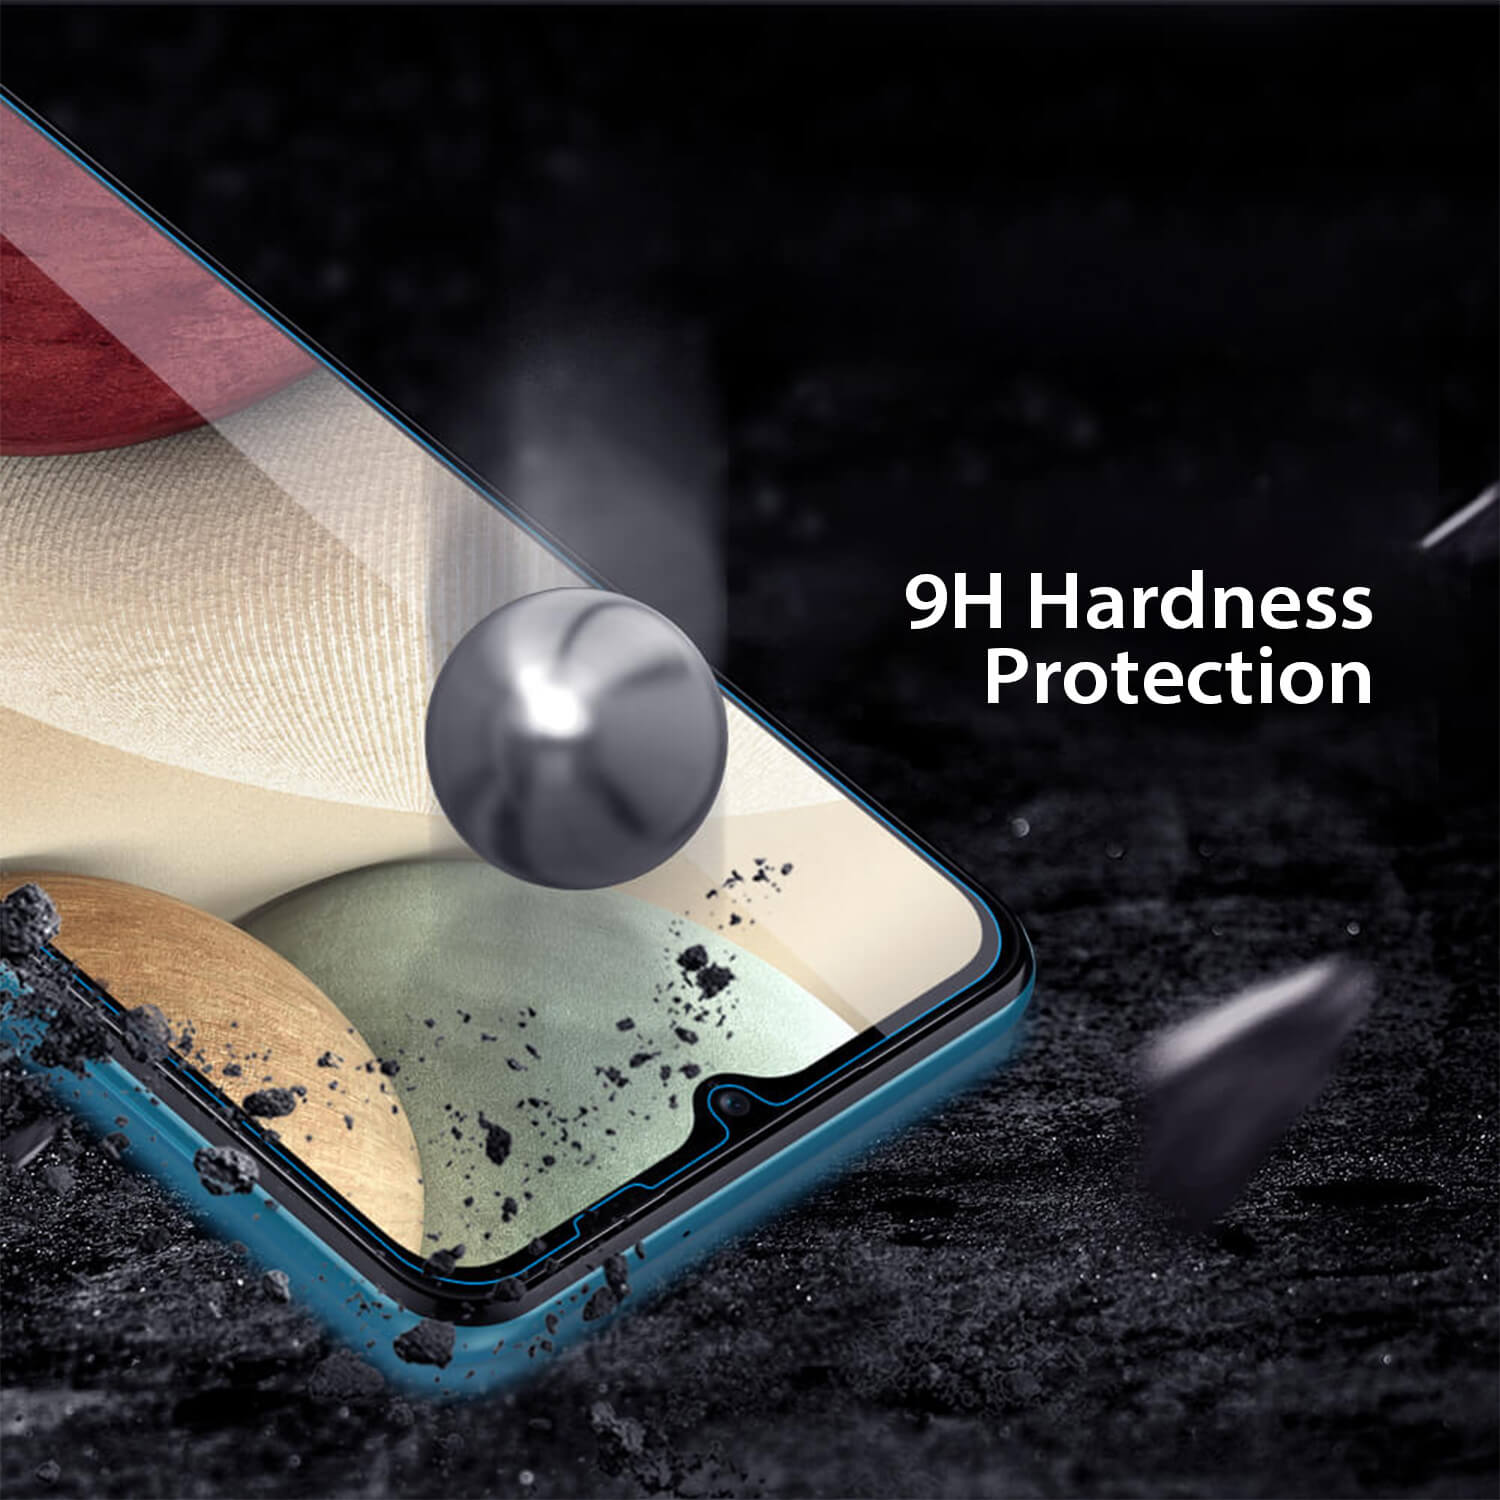 Tough on Samsung Galaxy A12 Tempered Glass Screen Protector Clear